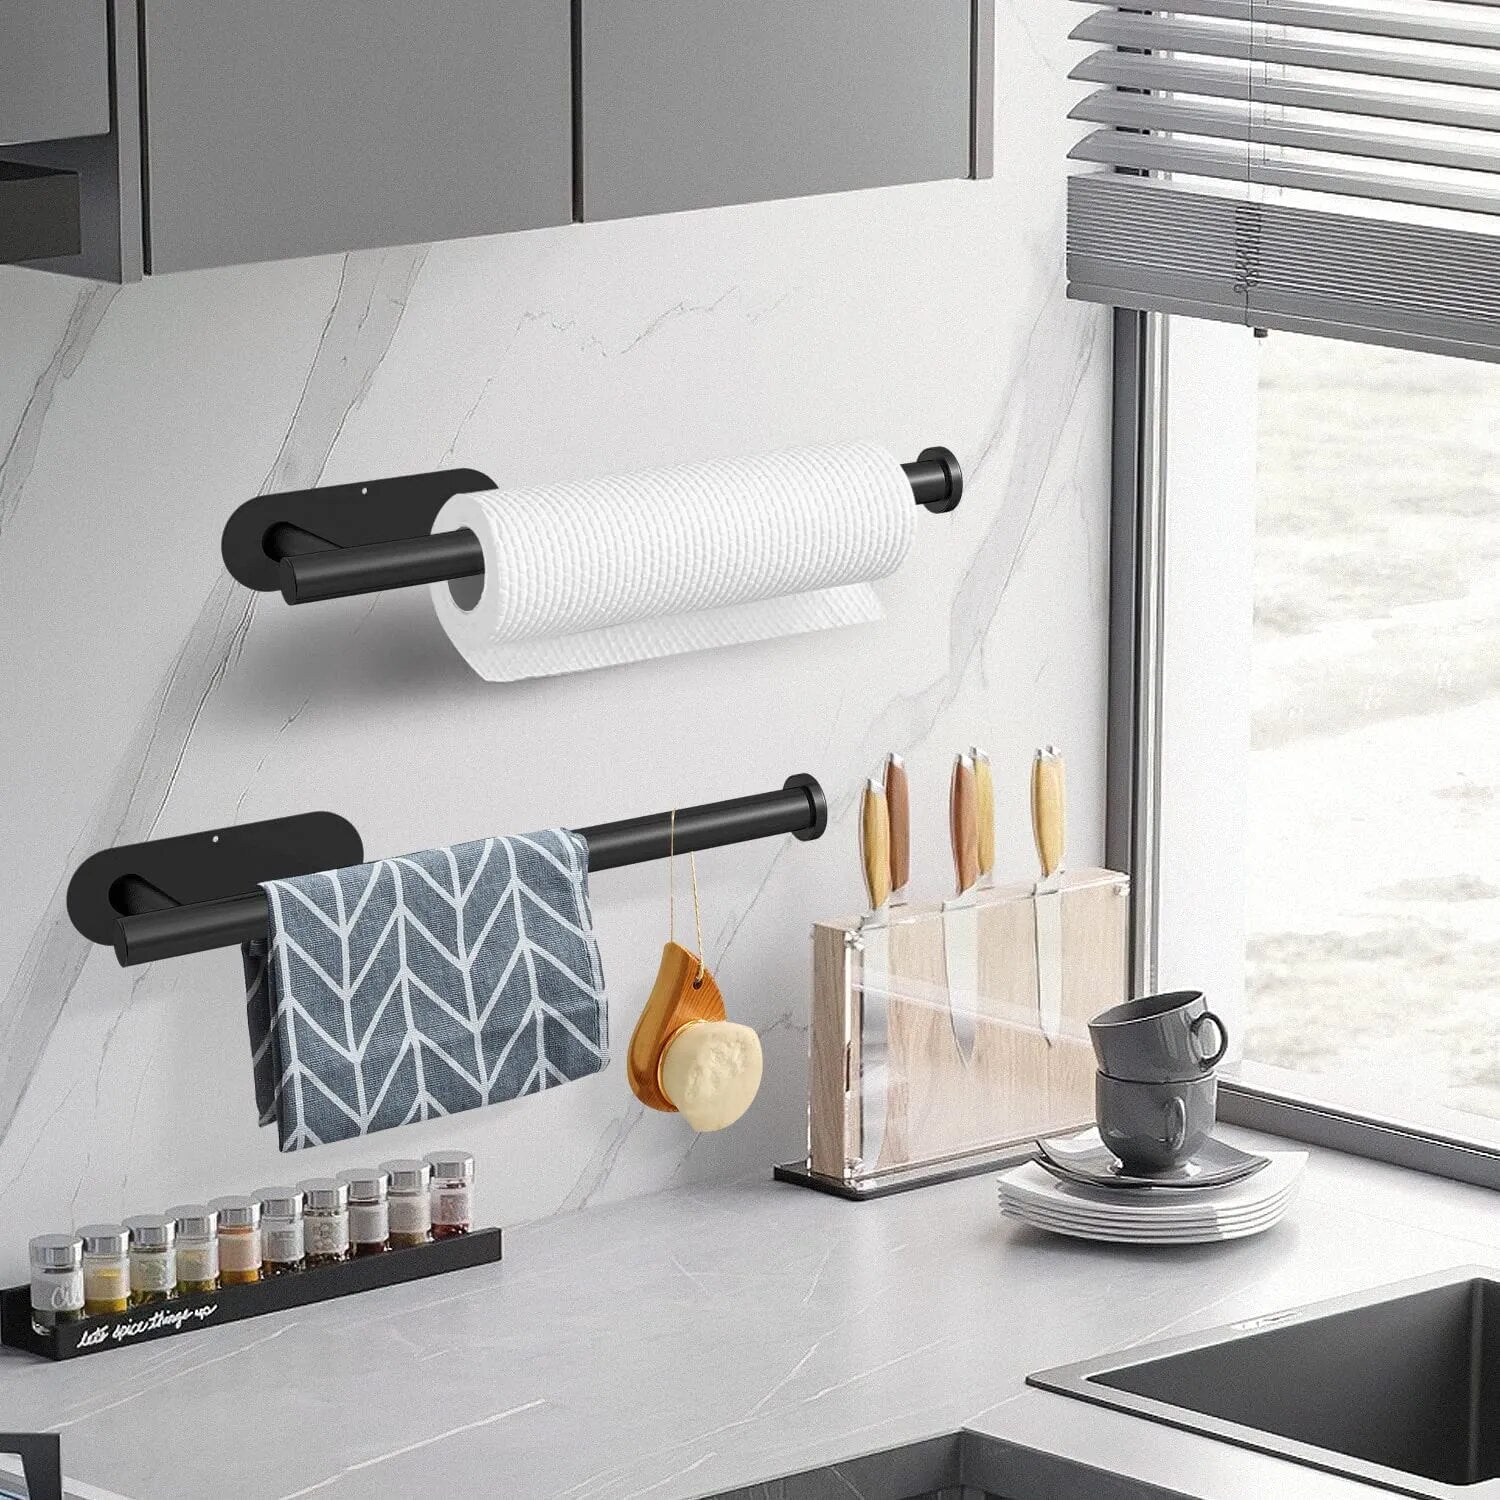 Punch-free Paper Towel Holder Stainless Steel Kitchen